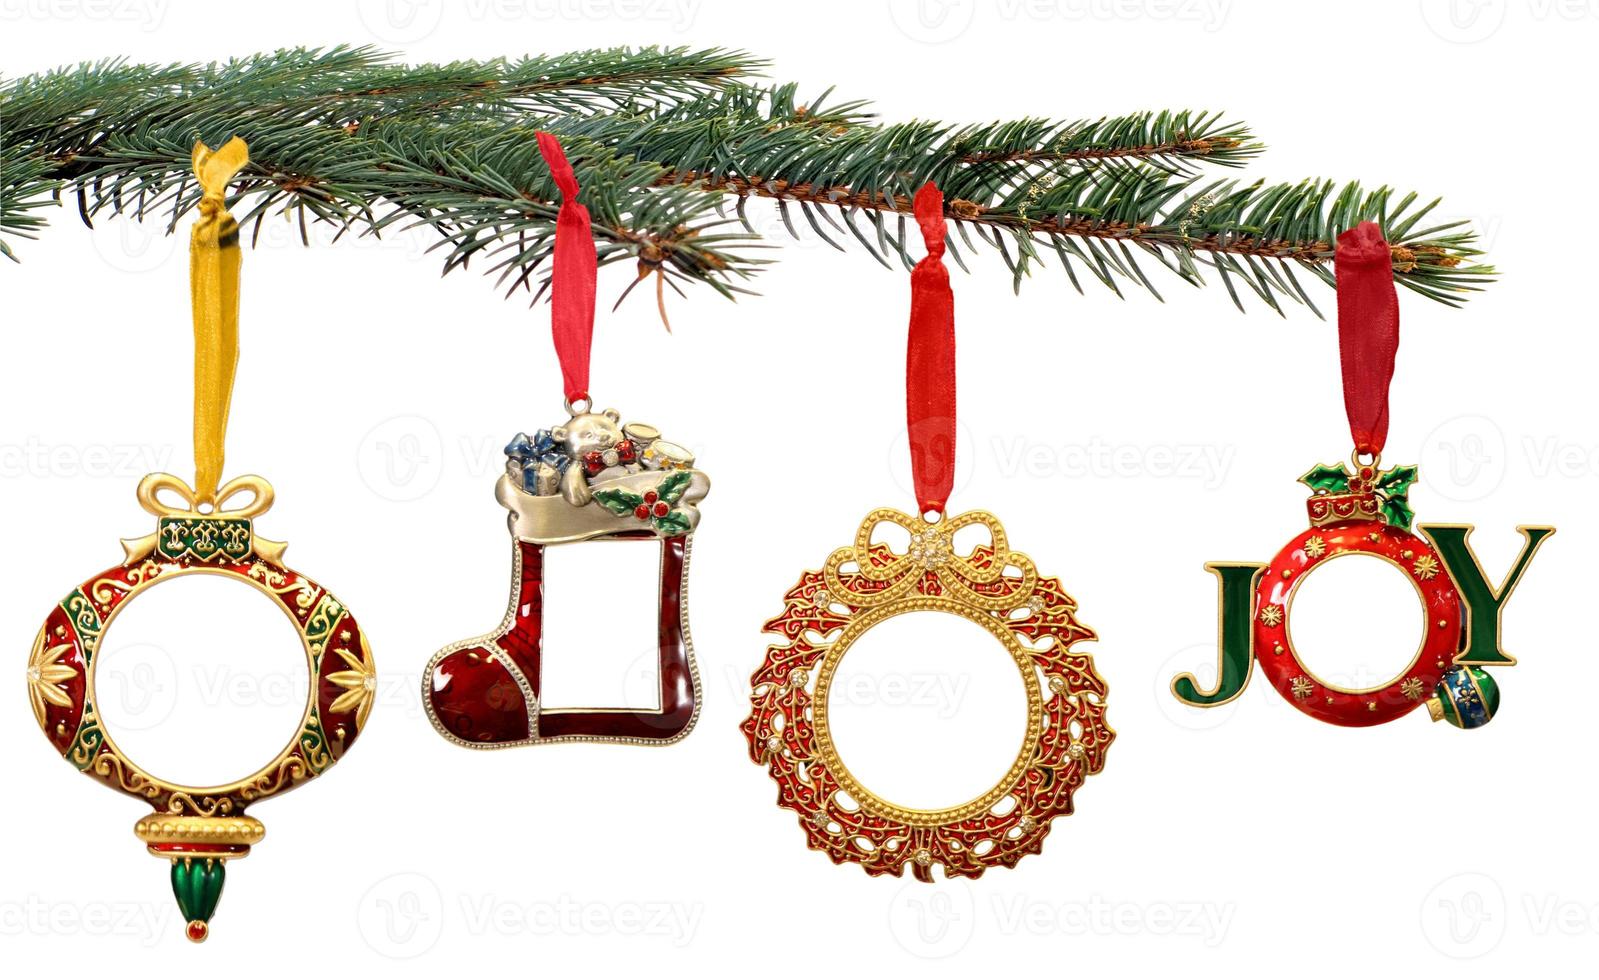 Hand Painted Christmas Ornaments Hanging on a Tree Branch photo